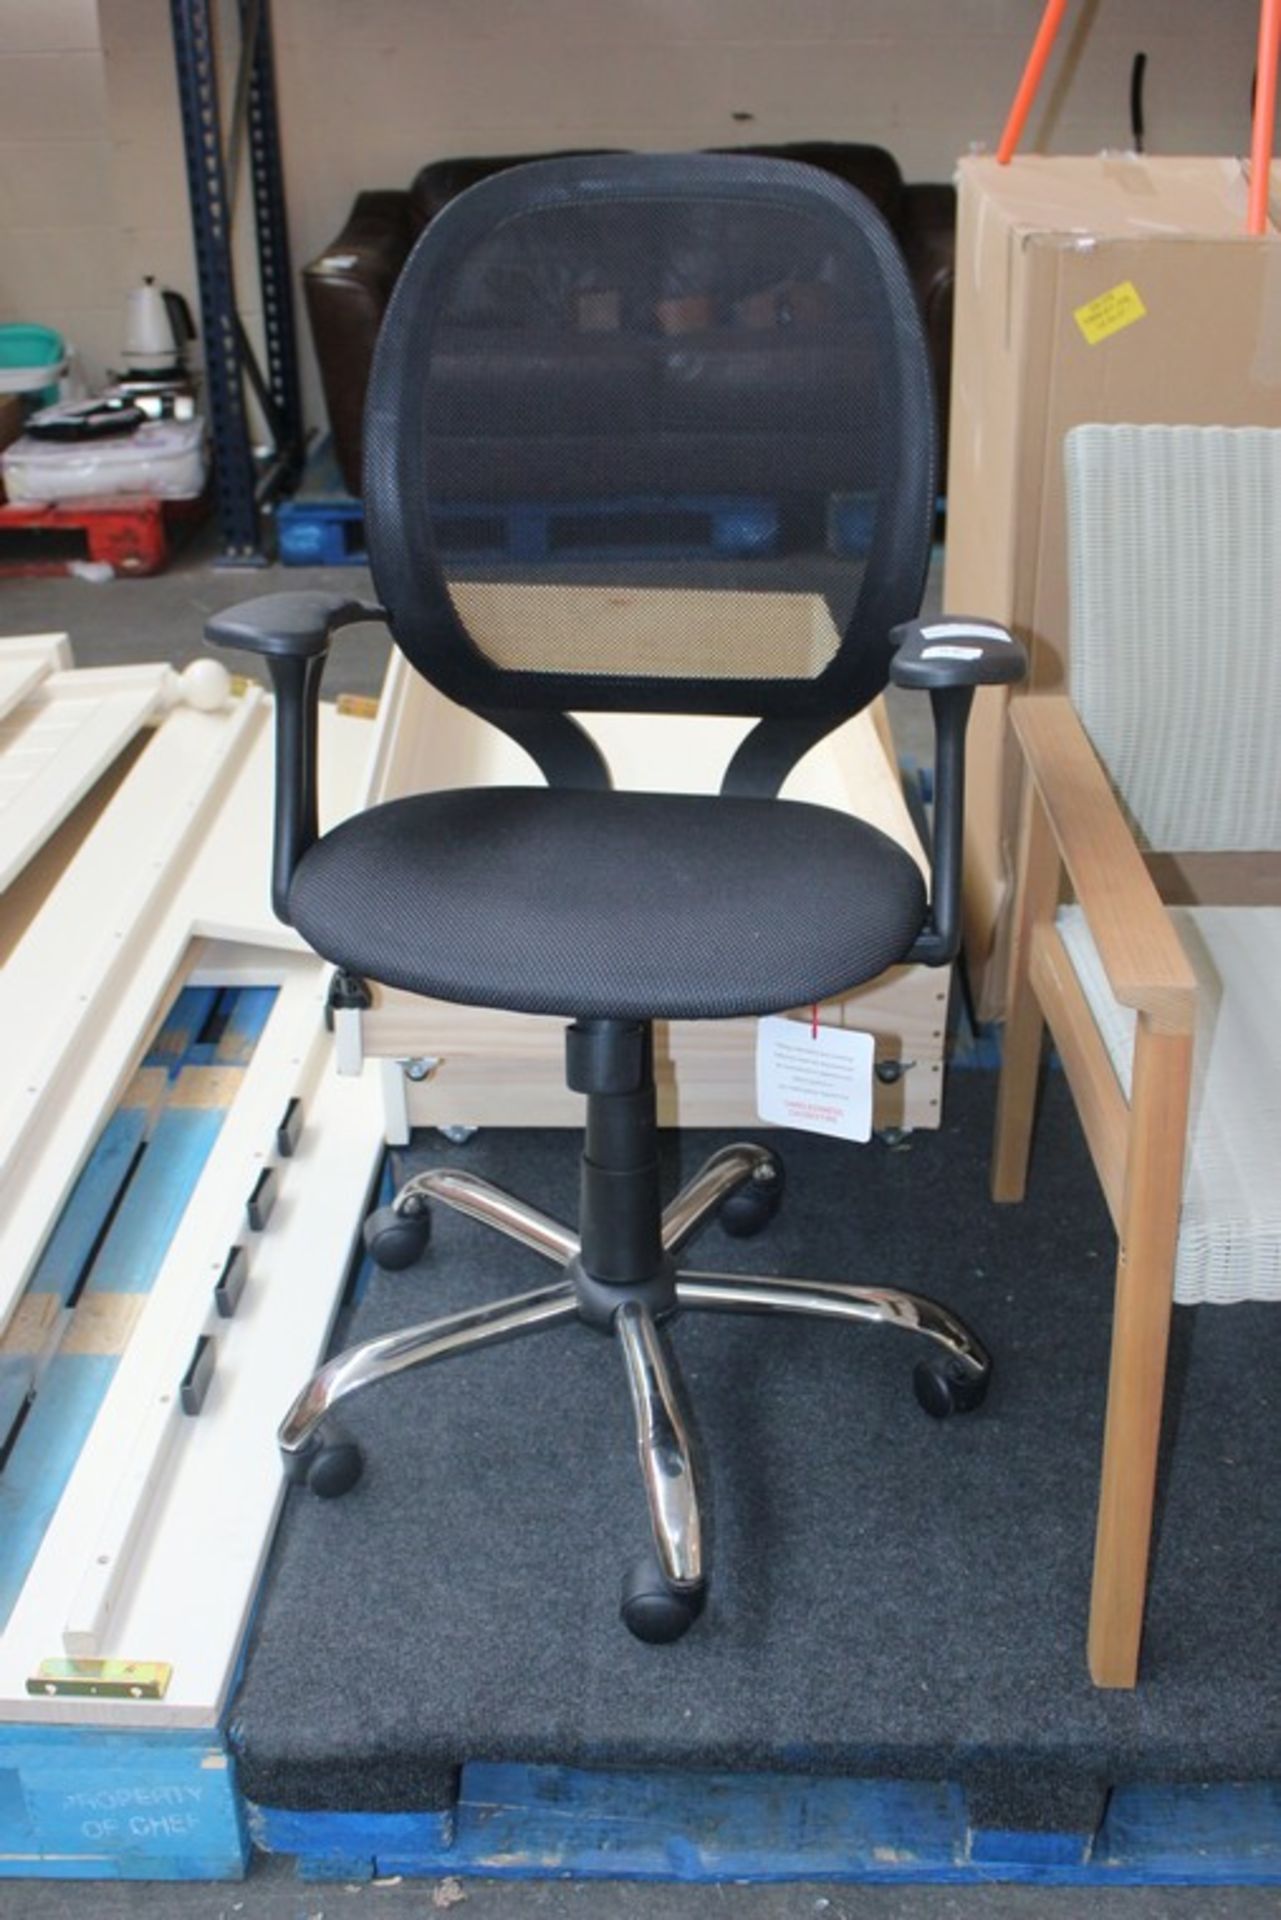 1 x BLACK AND CHROME OFFICE CHAIR RRP £100 (21.01.17) (2540718) *PLEASE NOTE THAT THE BID PRICE IS